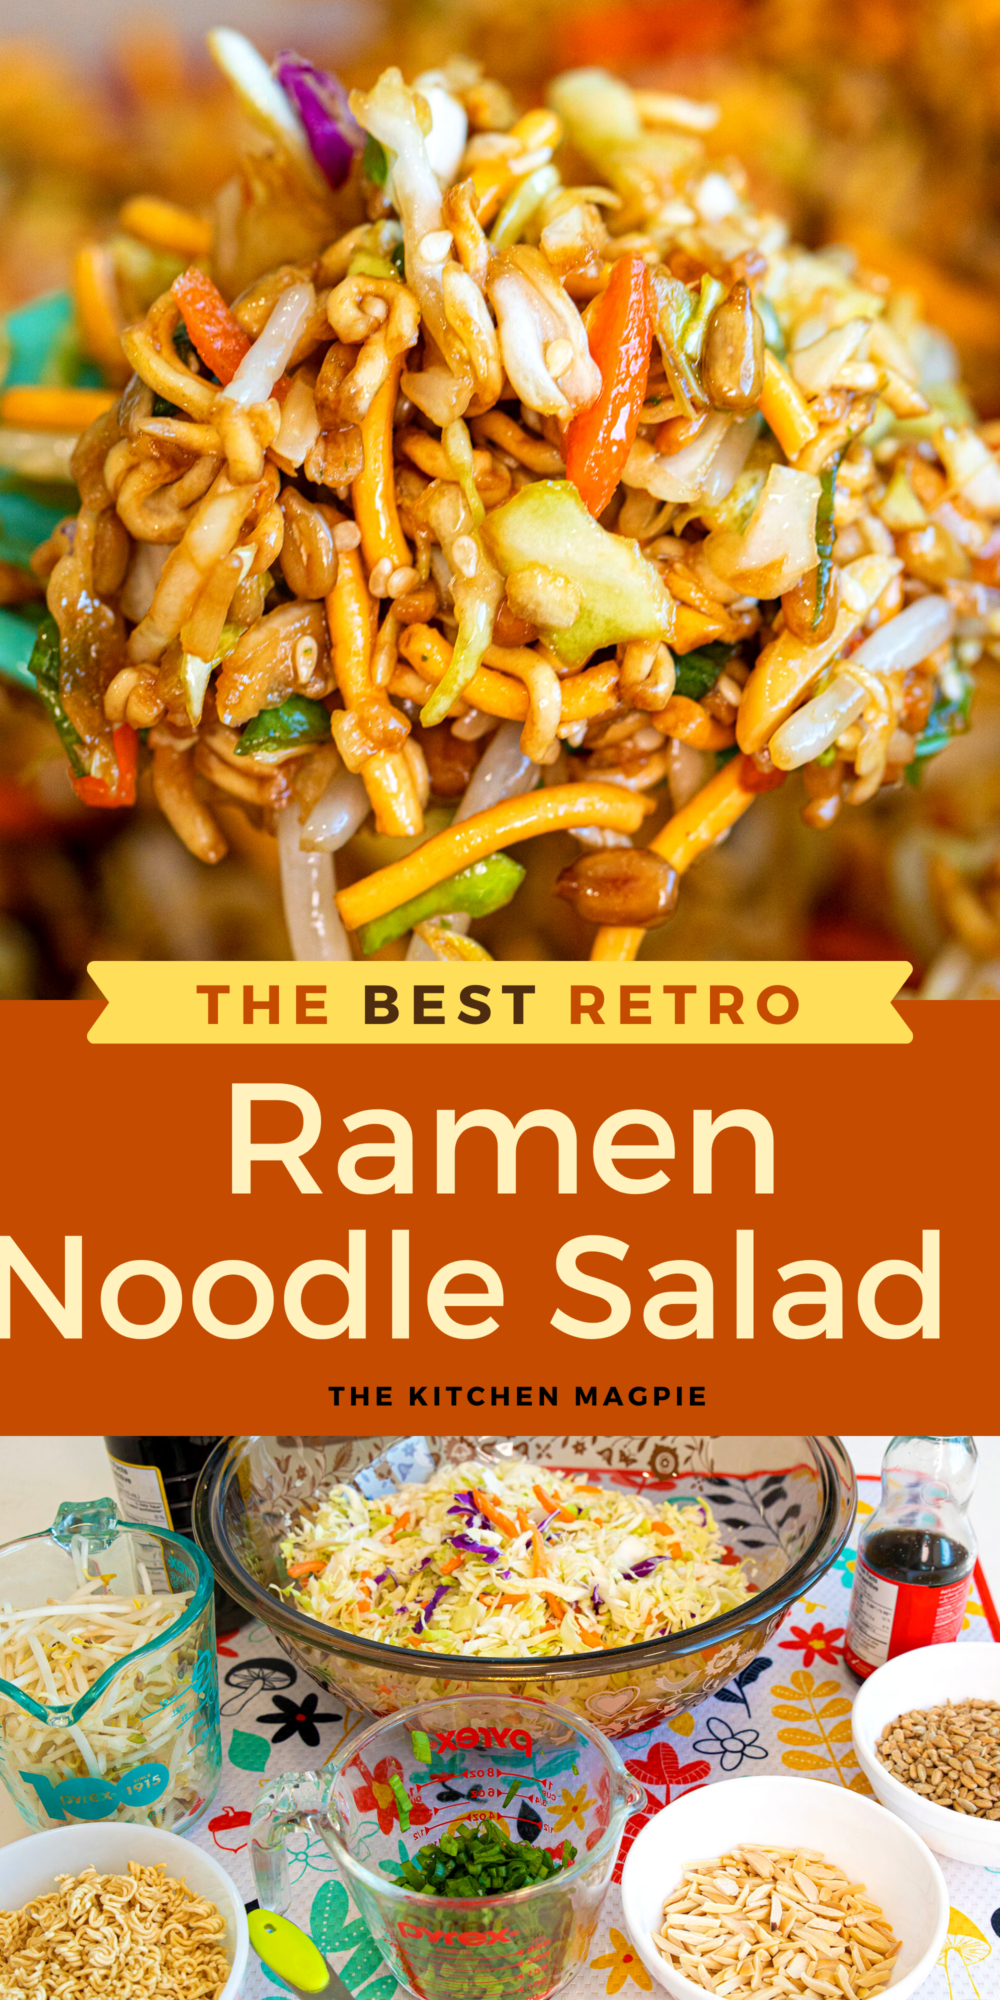 This retro ramen noodle salad has two types of crunchy noodles and is loaded with seeds, nuts, and vegetables, all tossed in a dark zesty sesame-flavored dressing!